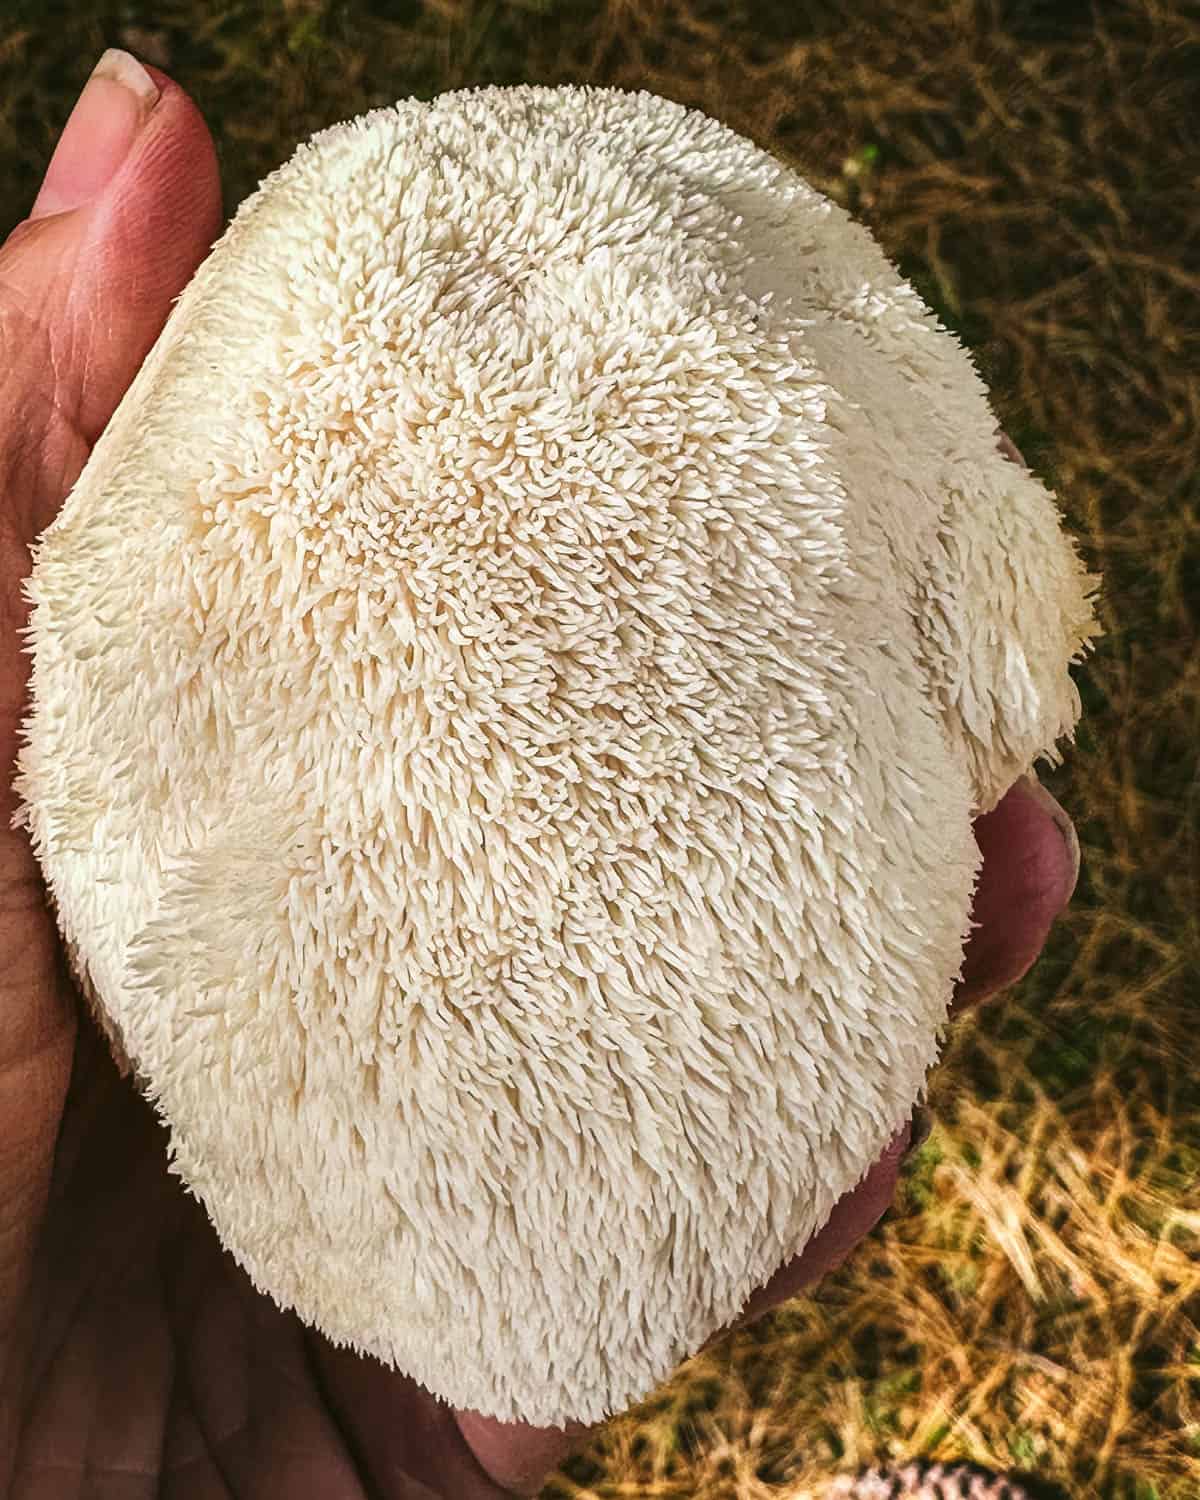 A lion's mane mushroom being held by a hand.